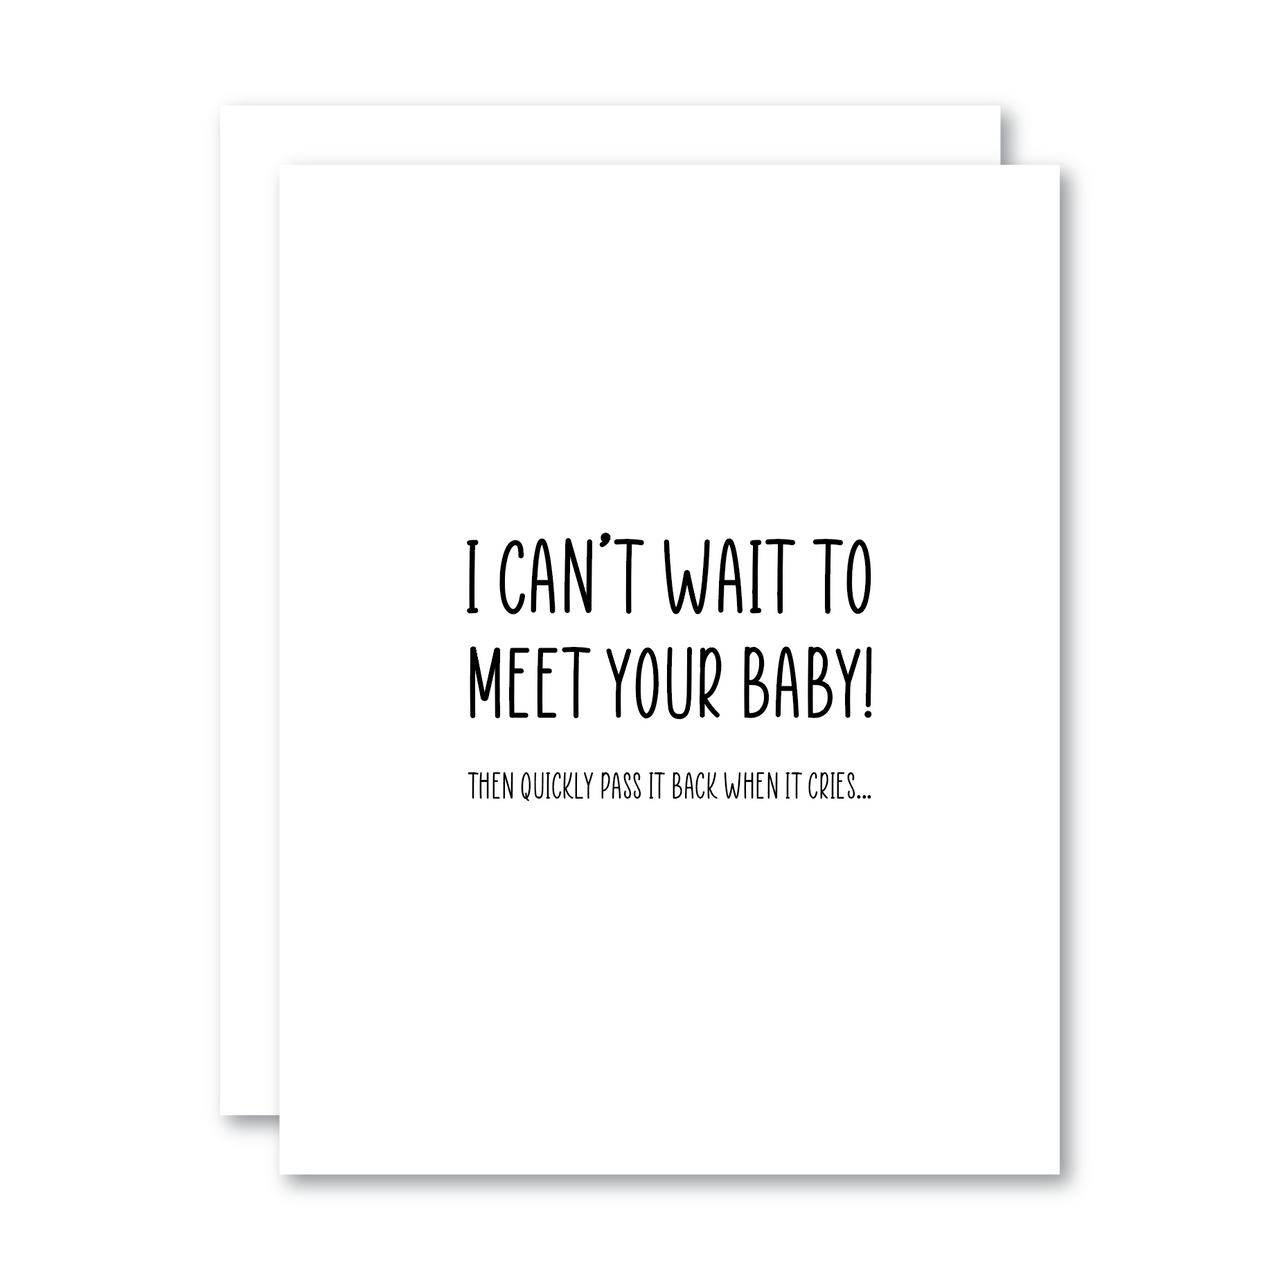 I can't wait to meet your baby!